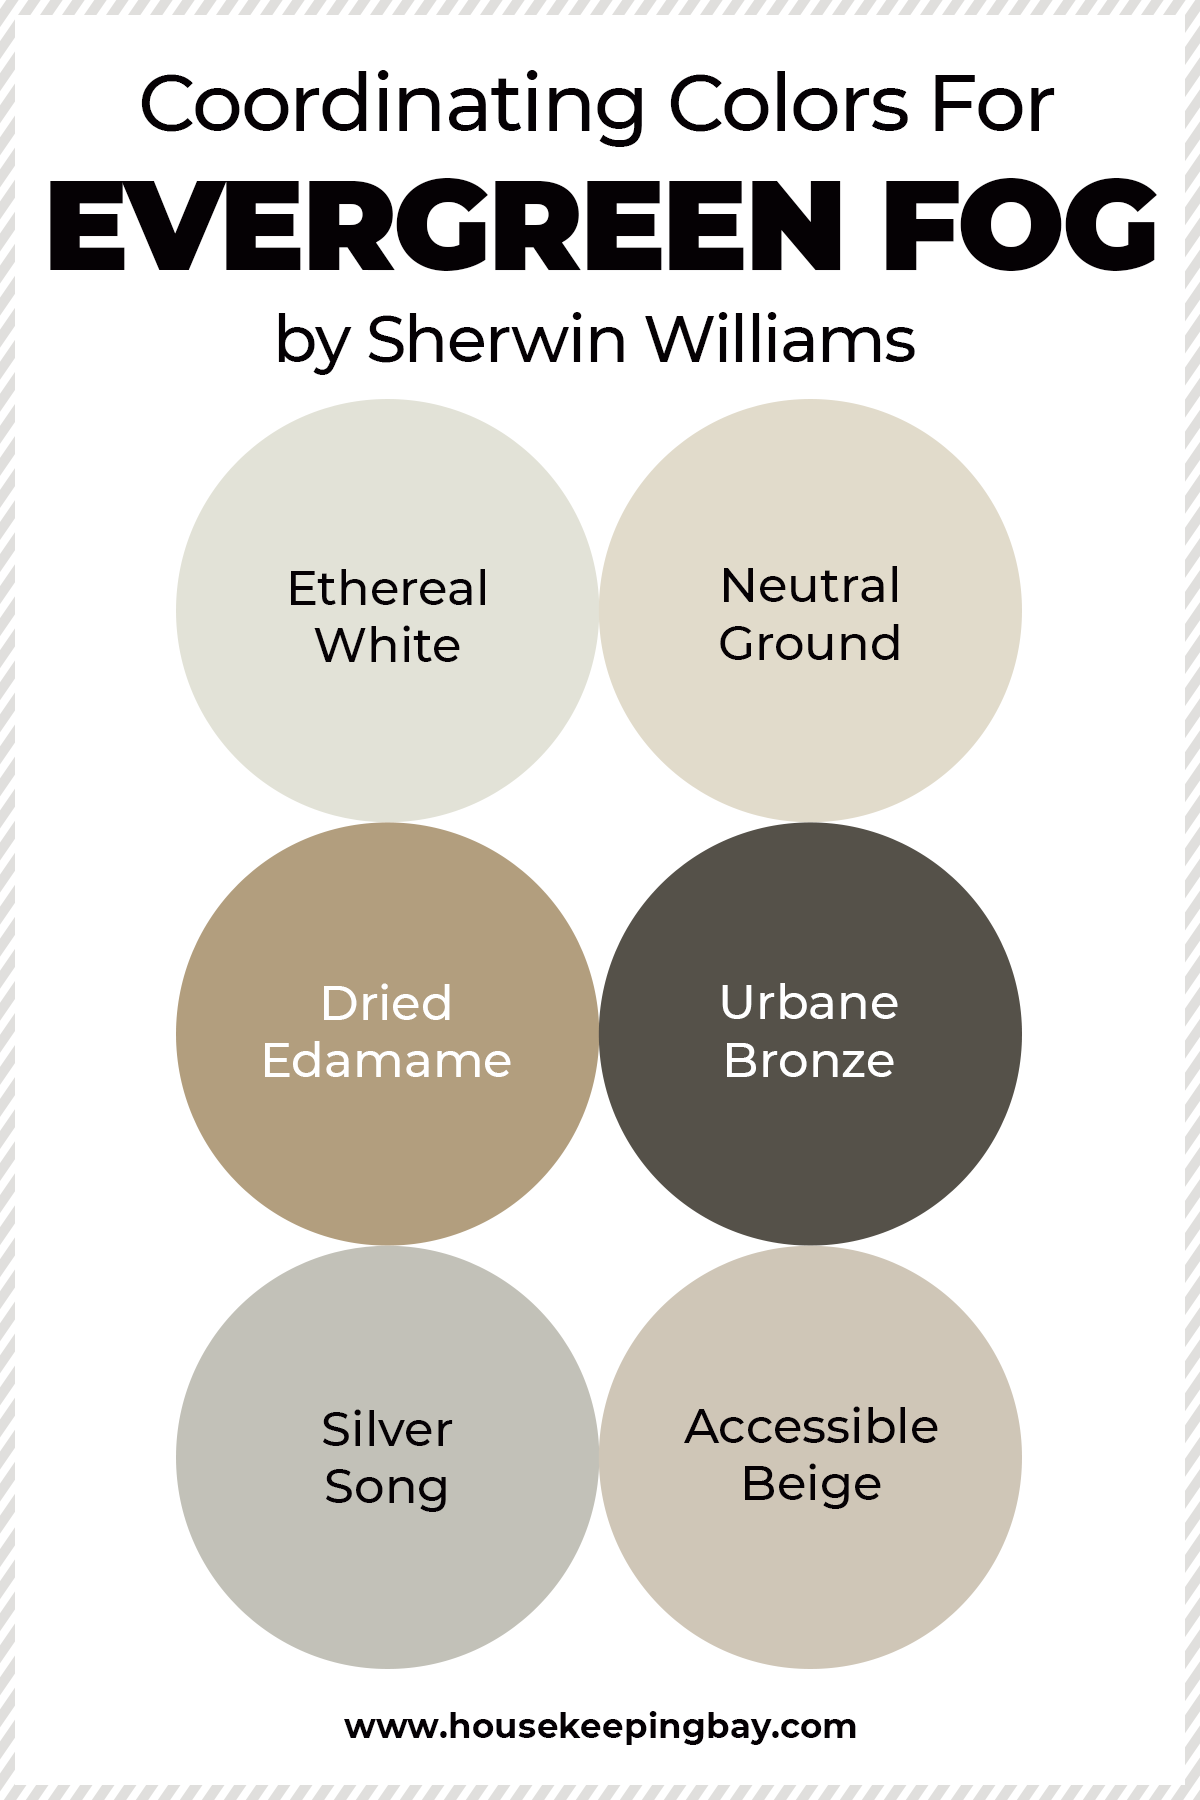 Coordinating Colors For Evergreen Fog By Sherwin Williams